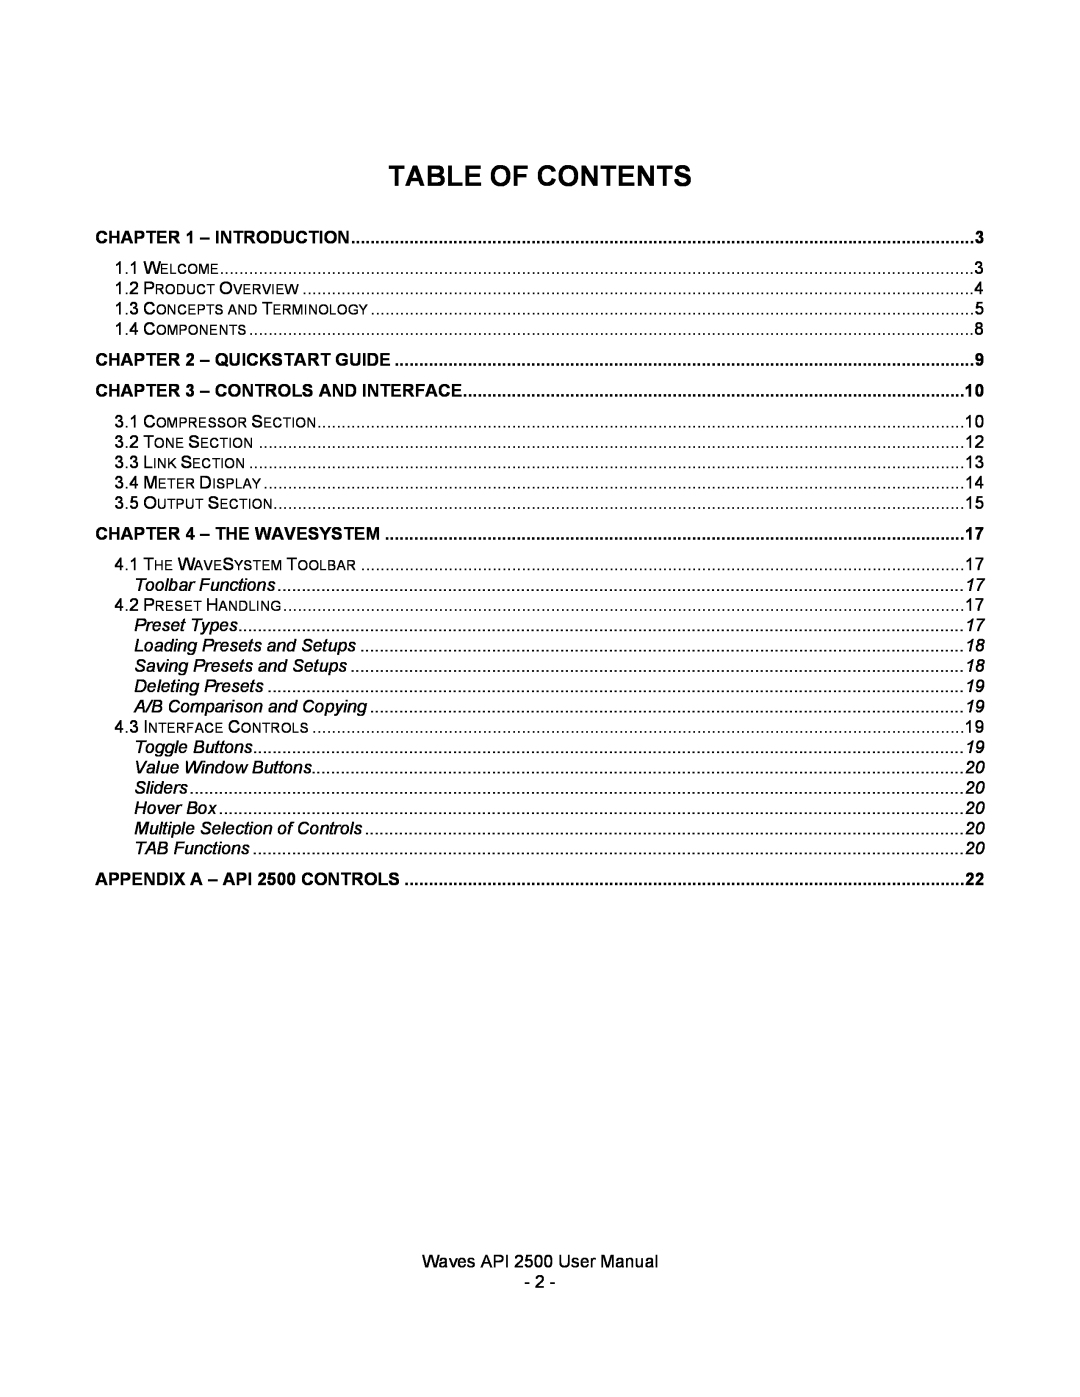 Waves 2500 user manual Table Of Contents 